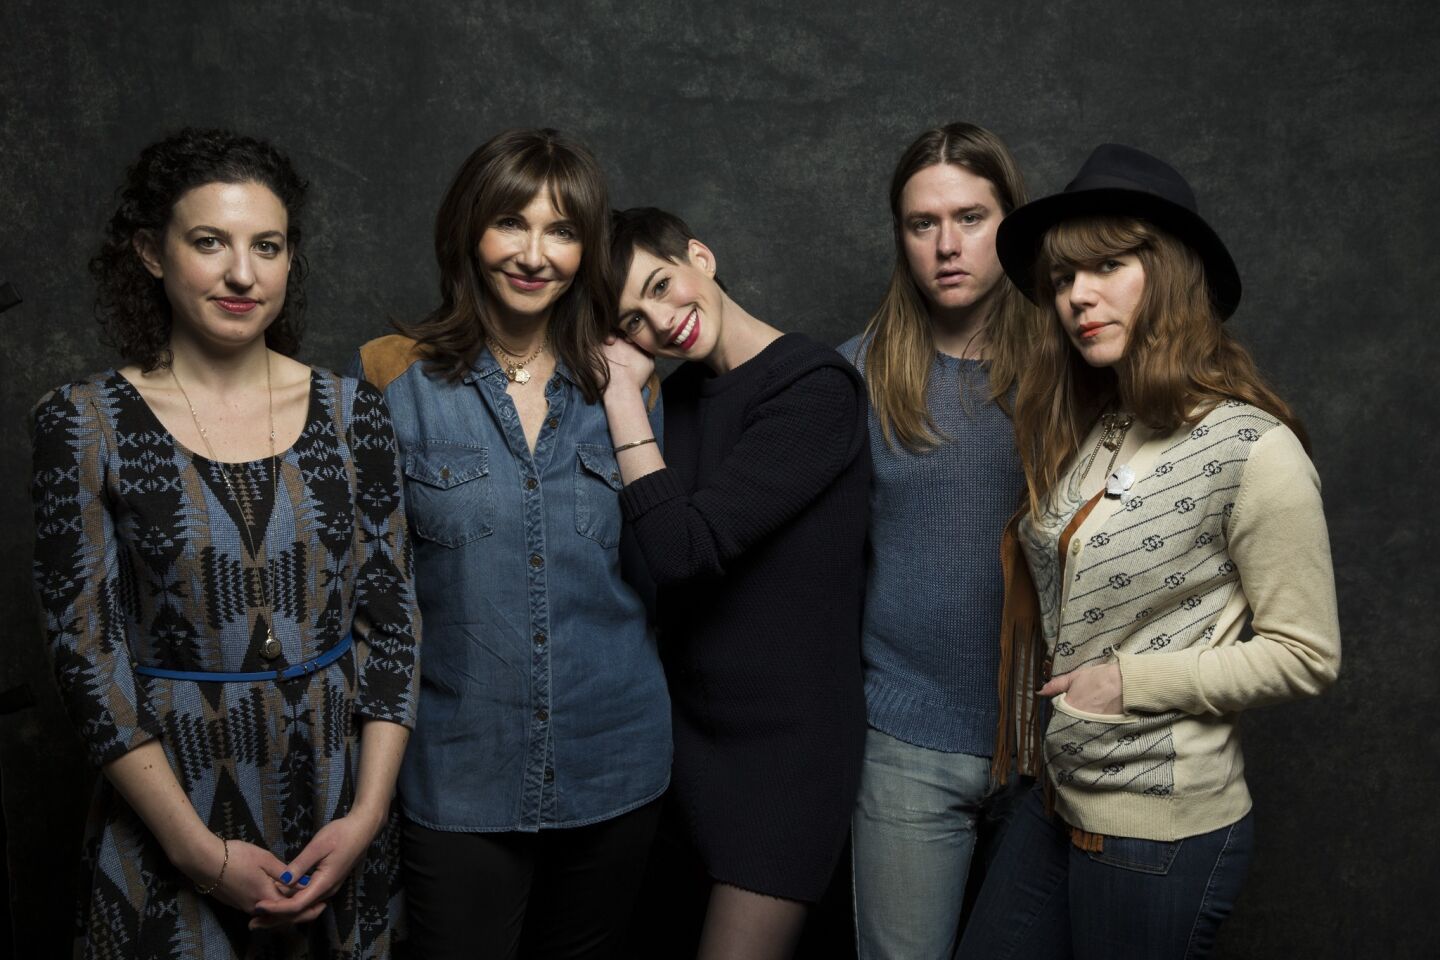 Kate Barker-Froyland, actresses Mary Steenburgen and Anne Hathaway, Jonathan Price and Jenny Lewis